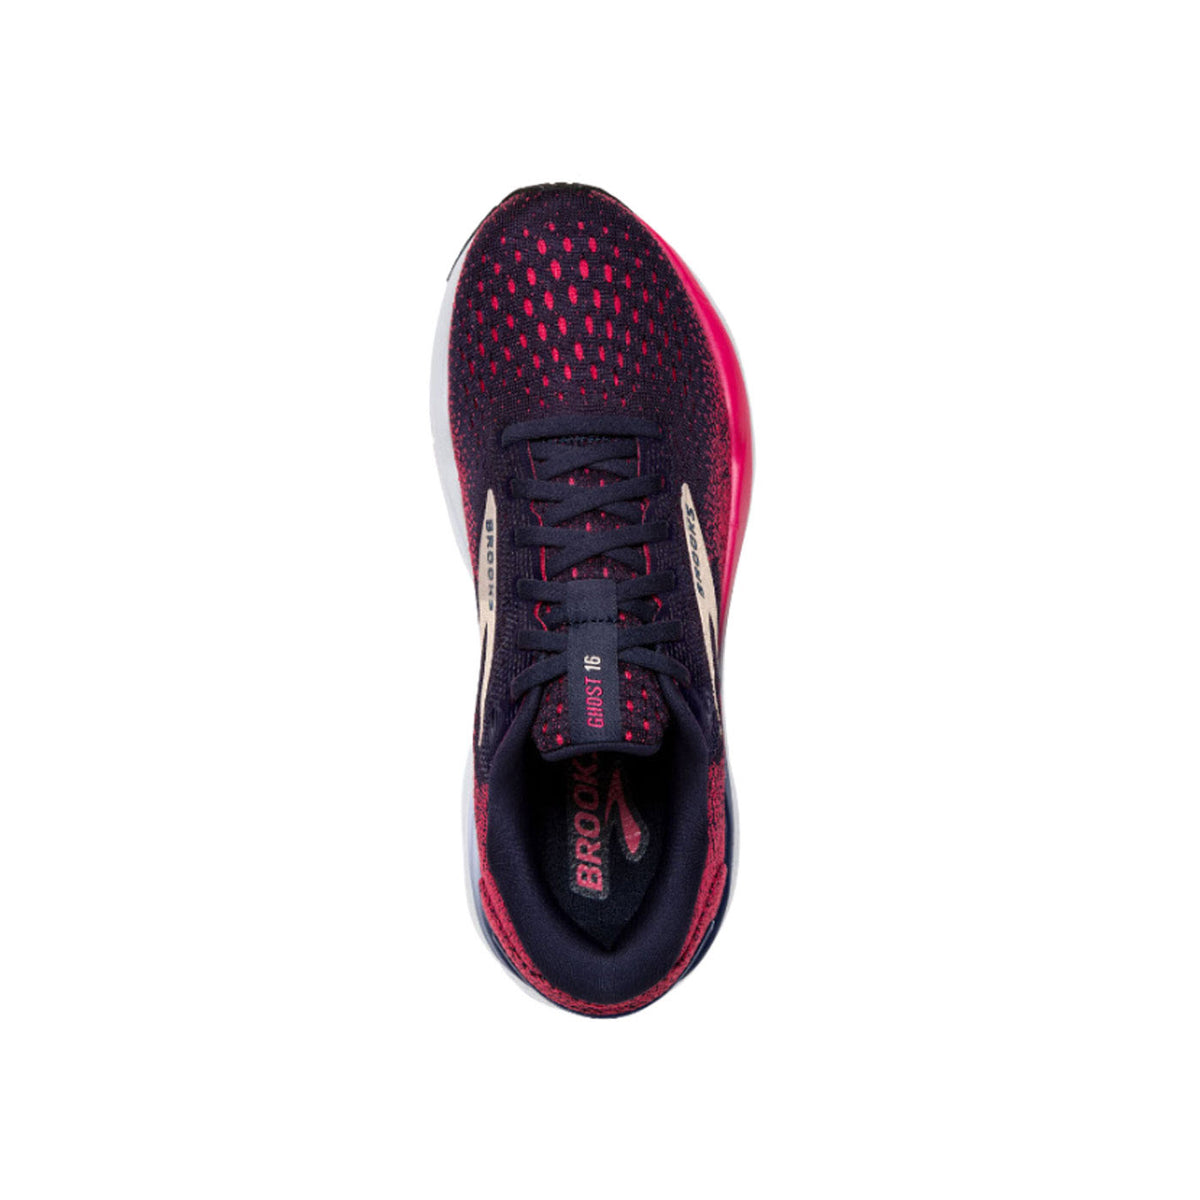 Top view of Brooks BROOKS GHOST 16 PEACOAT/RASPBERRY/APRICOT - WOMENS running shoe with white accents, featuring a mesh upper and laced-up design.